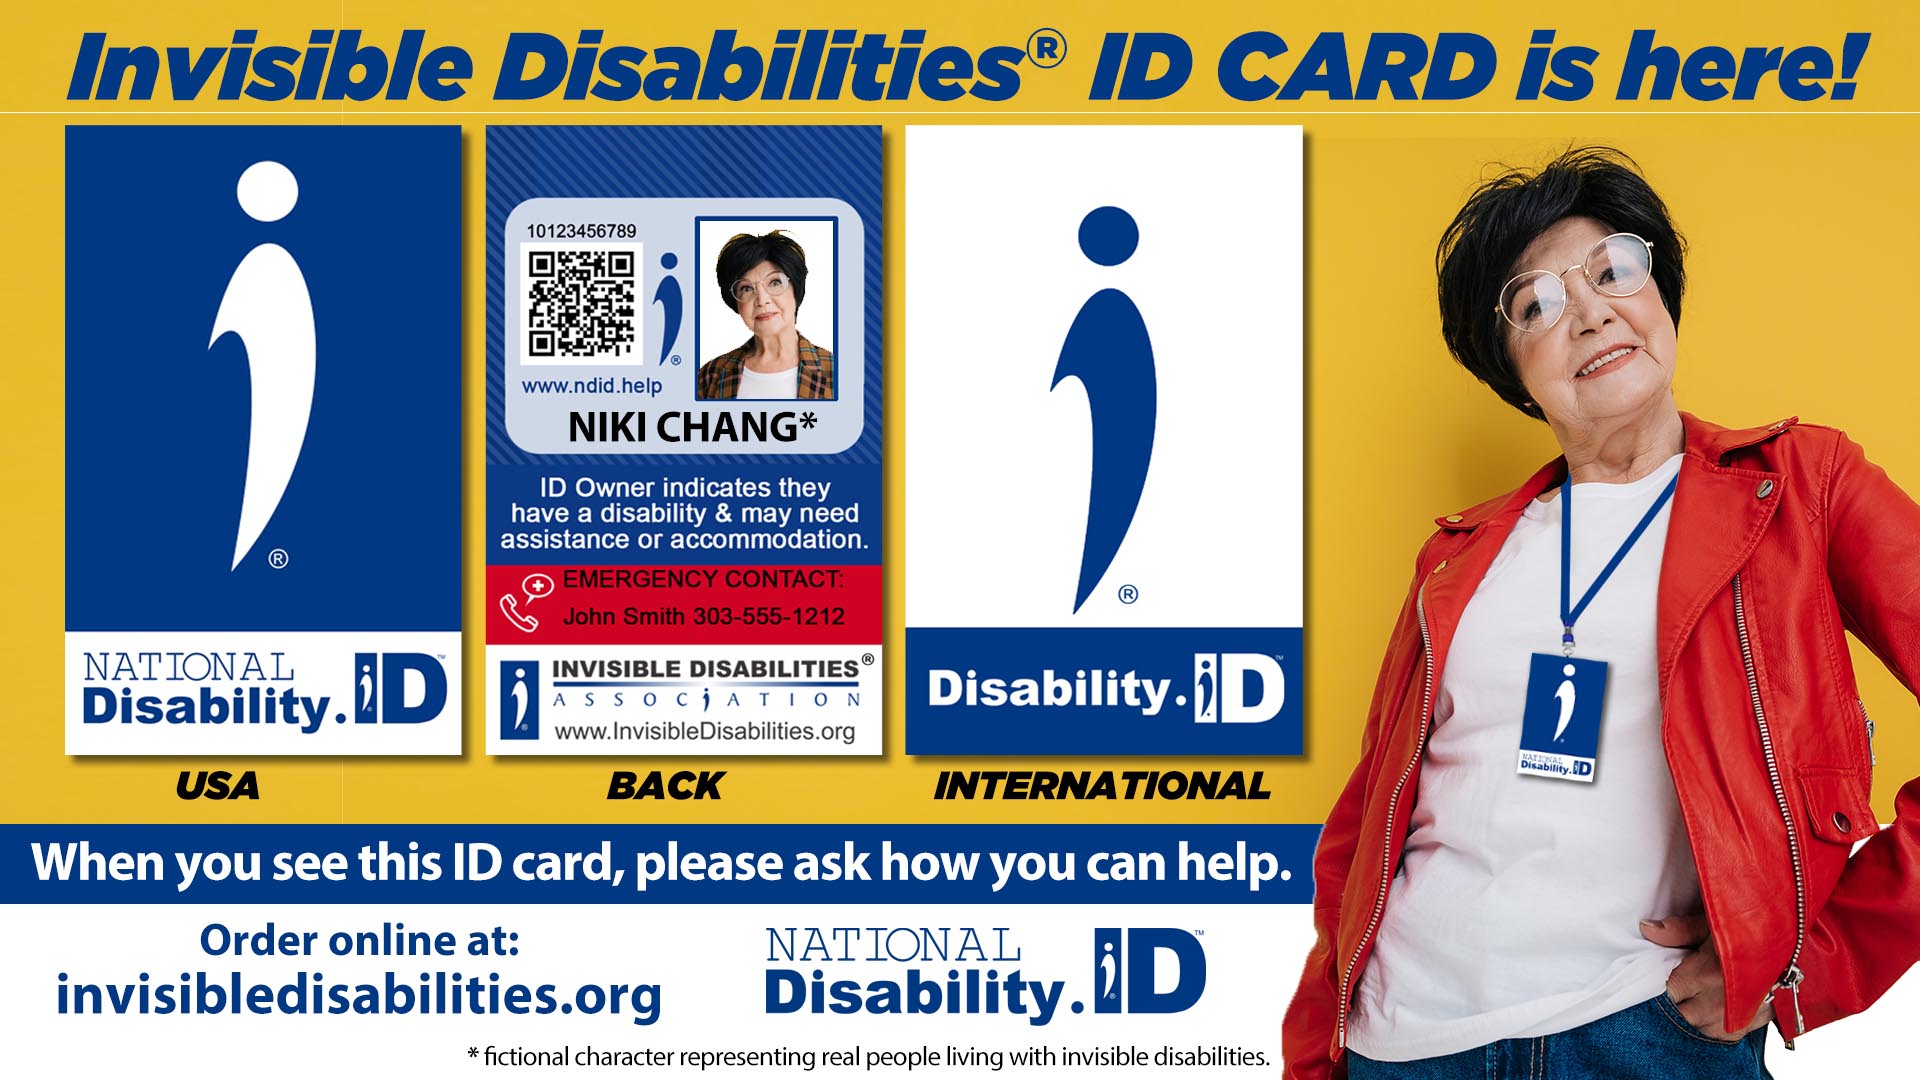 Voluntary Disability ID Card Provides Help